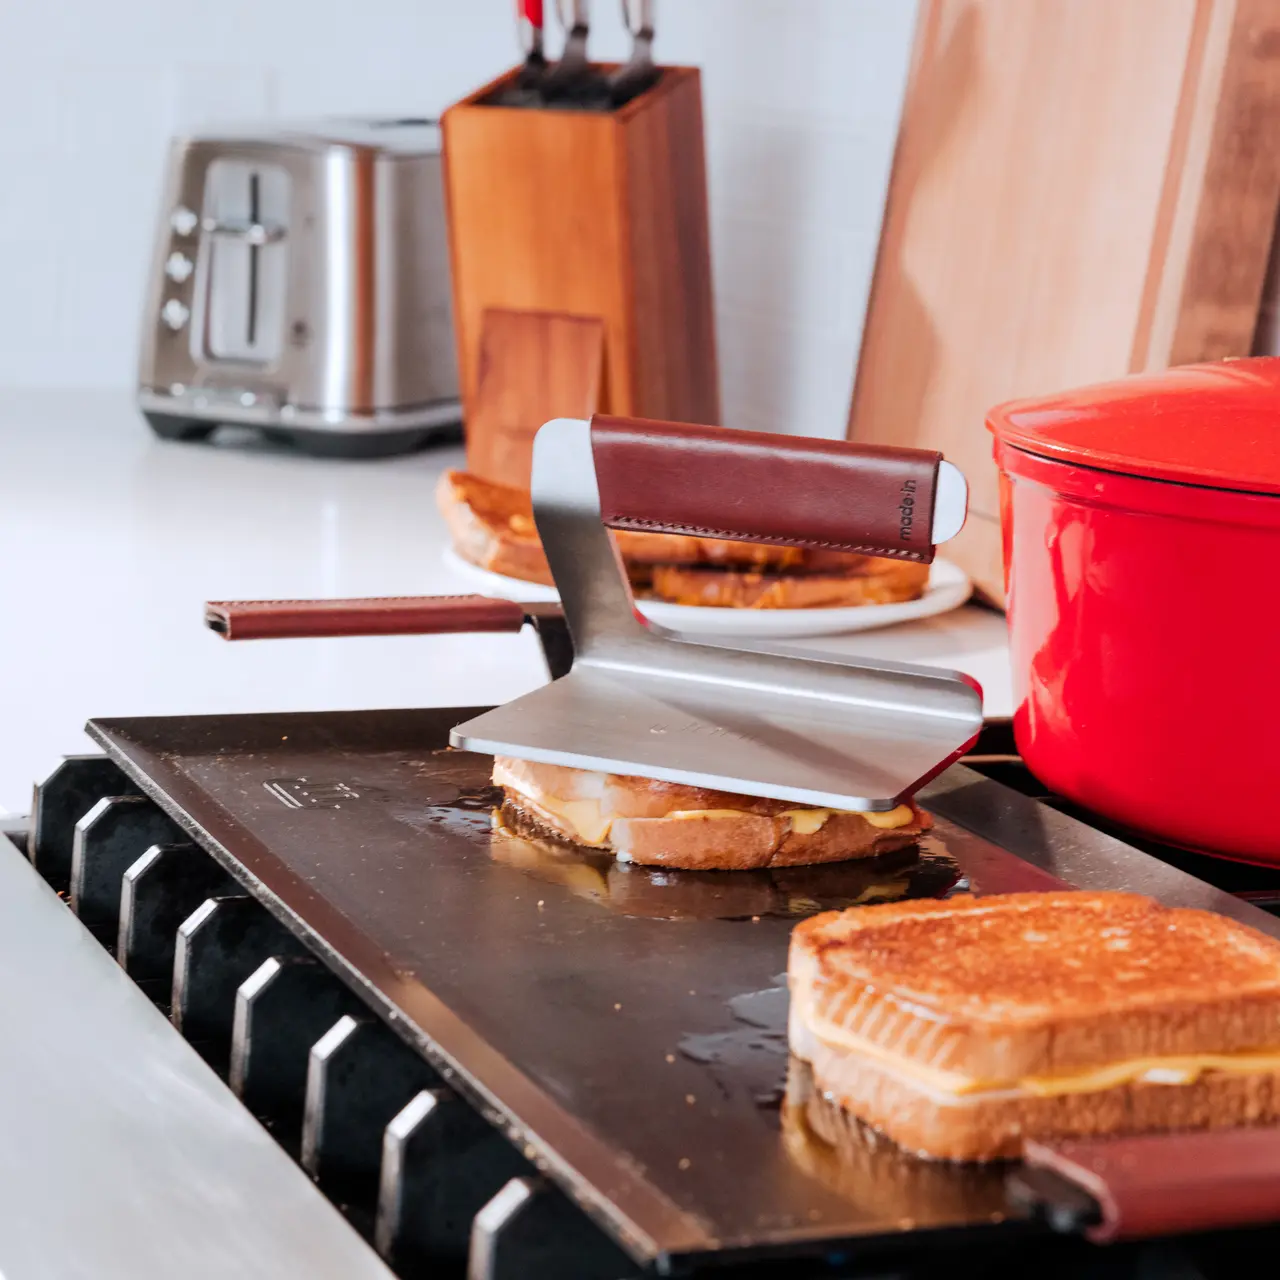 A grilled cheese sandwich is being pressed with a spatula on a stovetop griddle, with a toaster and kitchen utensils in the background.